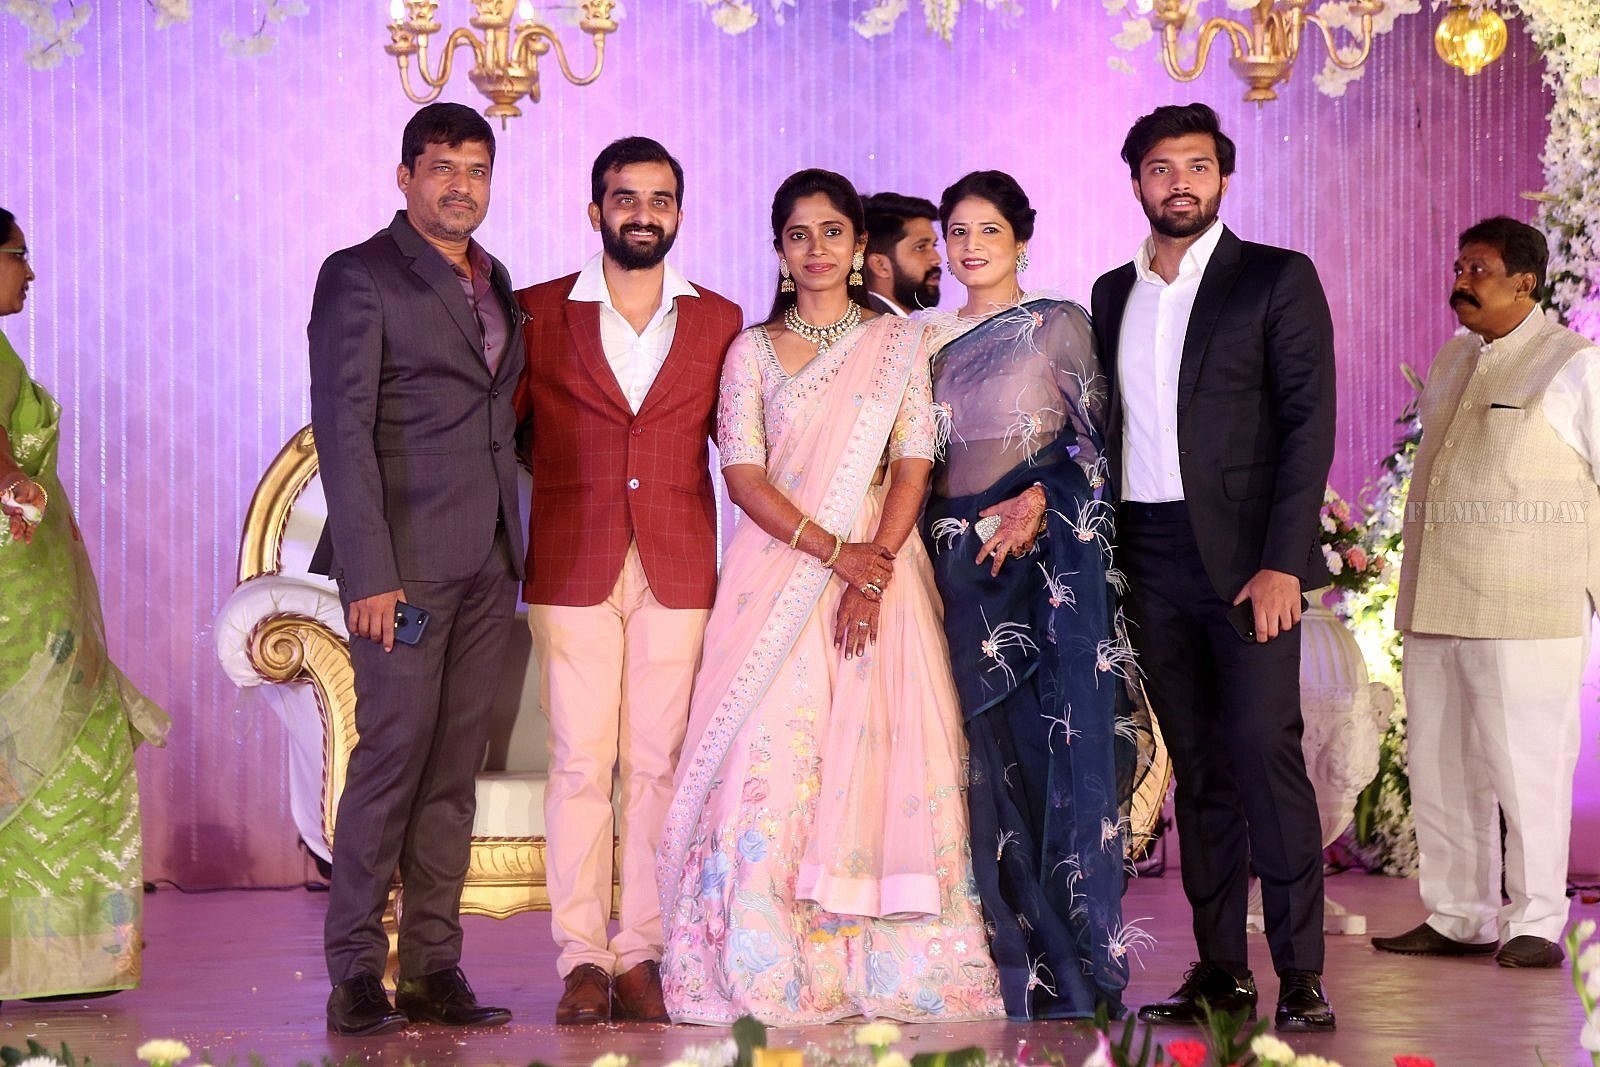 Harshit Reddy - Gouthami Wedding Reception Photos | Picture 1617405